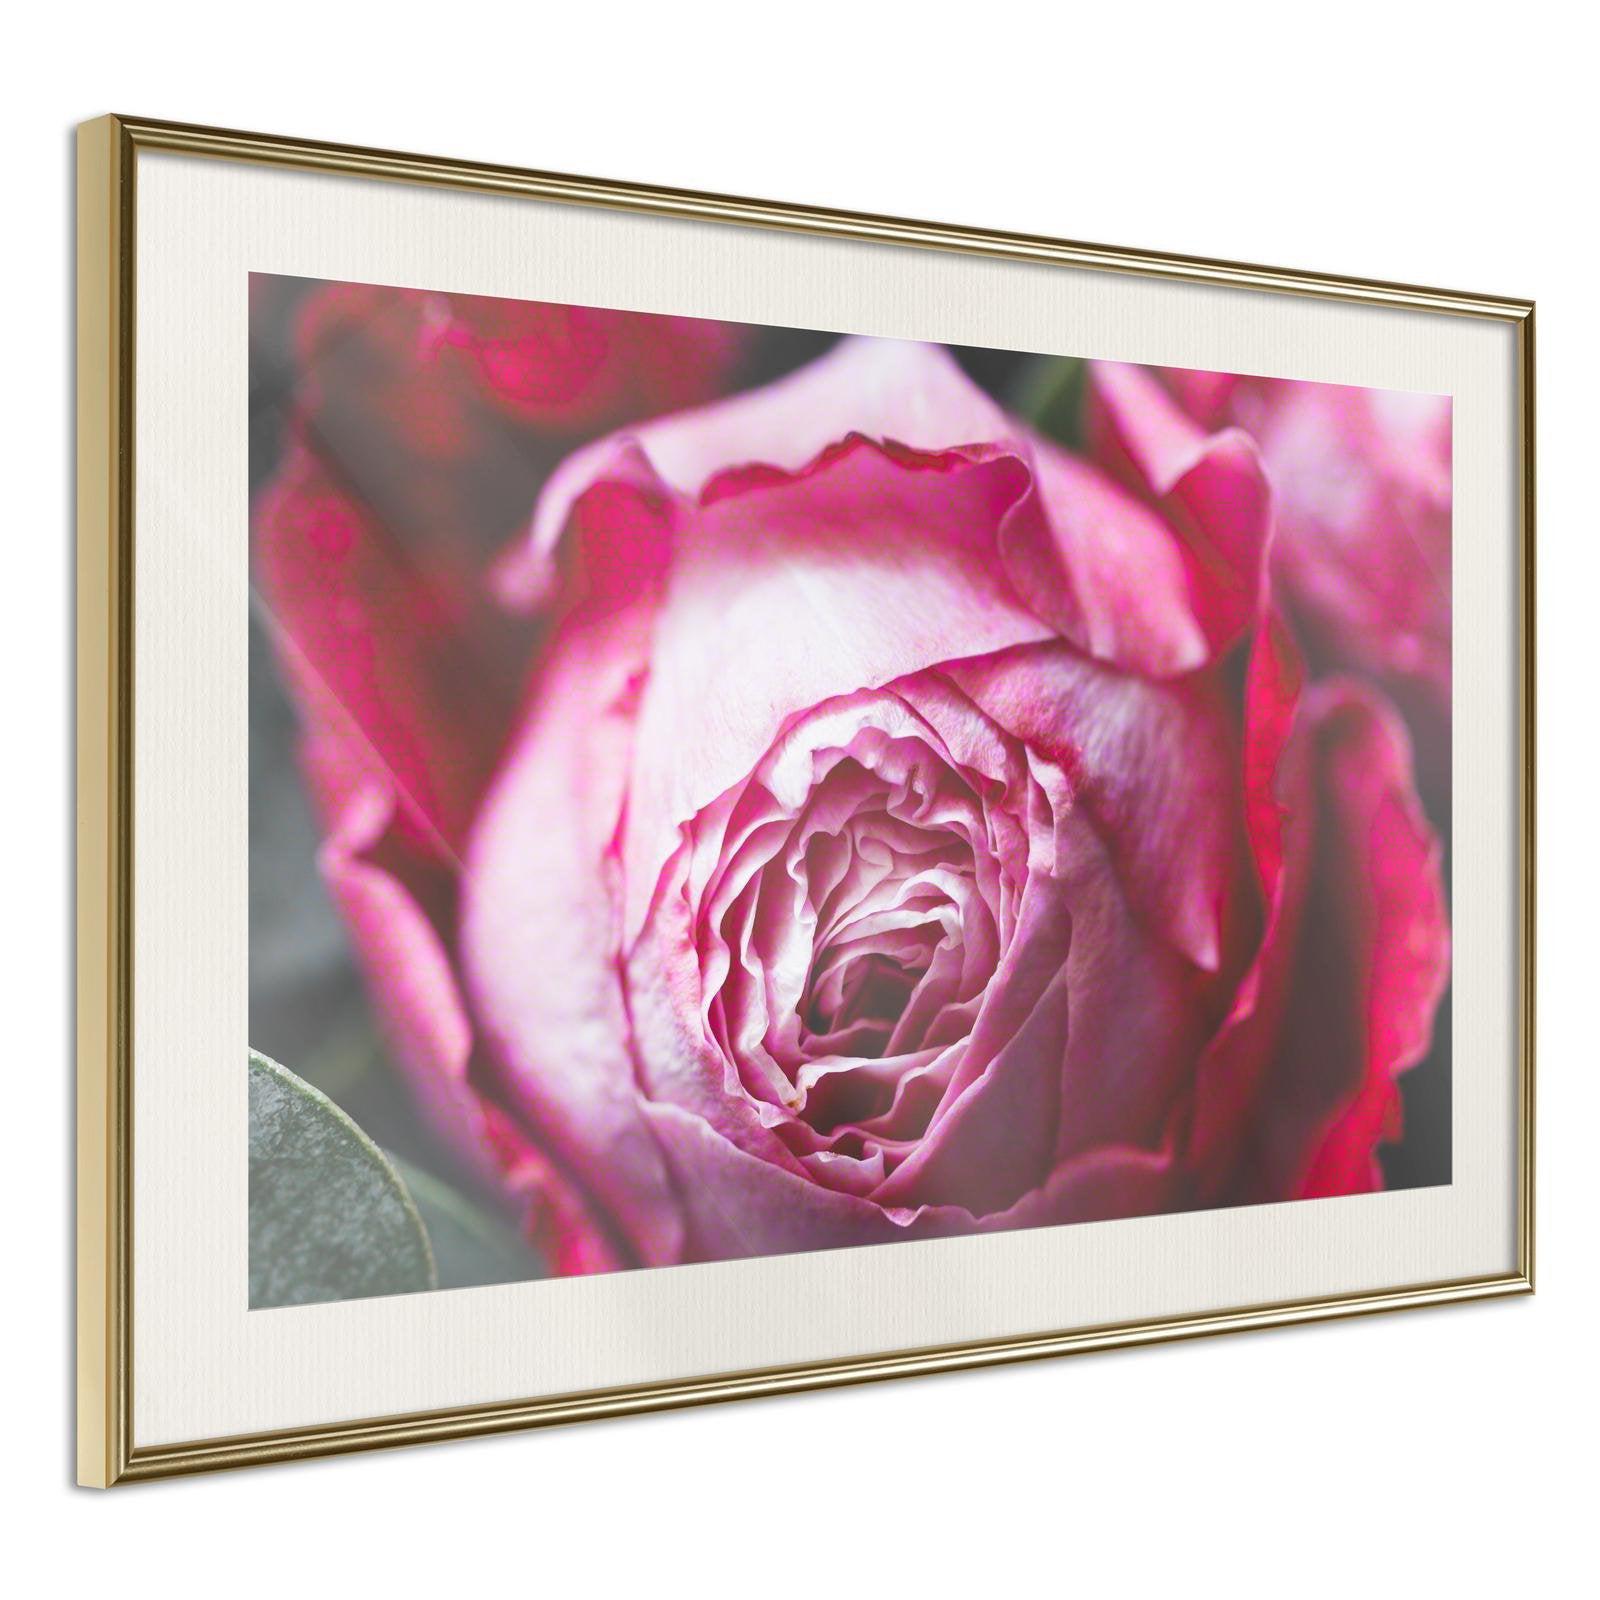 Inramad Poster / Tavla - Blooming Rose-Poster Inramad-Artgeist-30x20-Guldram med passepartout-peaceofhome.se